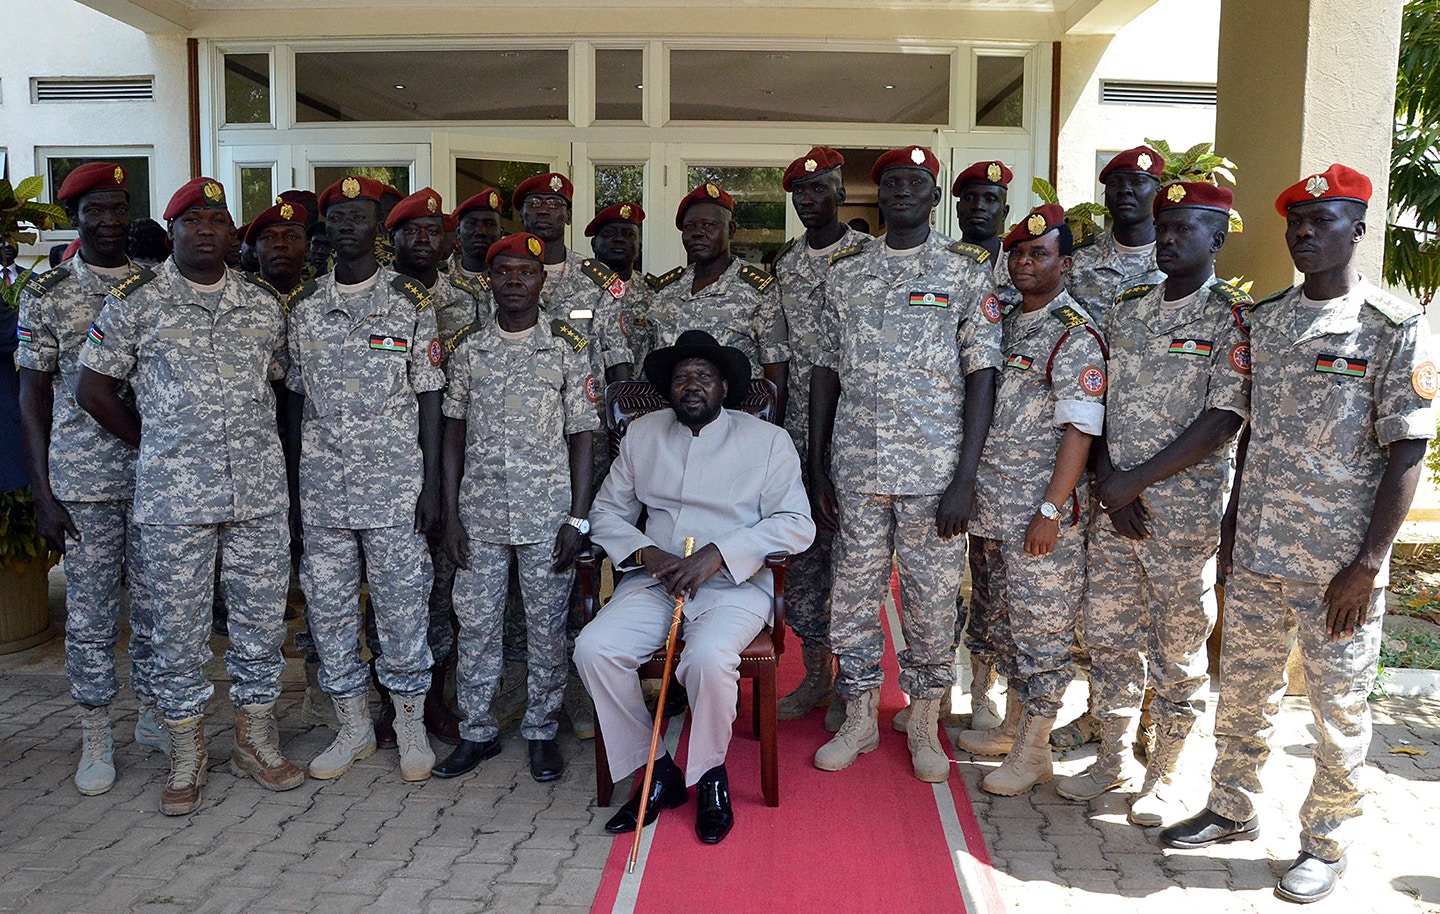 JUBA, SOUTH SUDAN - DECEMBER 28:  South Sudanese President Salva Kiir Mayardit (C) poses family photo with the members of Presidential Guard during a meeting at the Presidential Palace in Juba, South Sudan on December 28, 2014. (Photo by Samir Bol/Anadolu Agency/Getty Images)